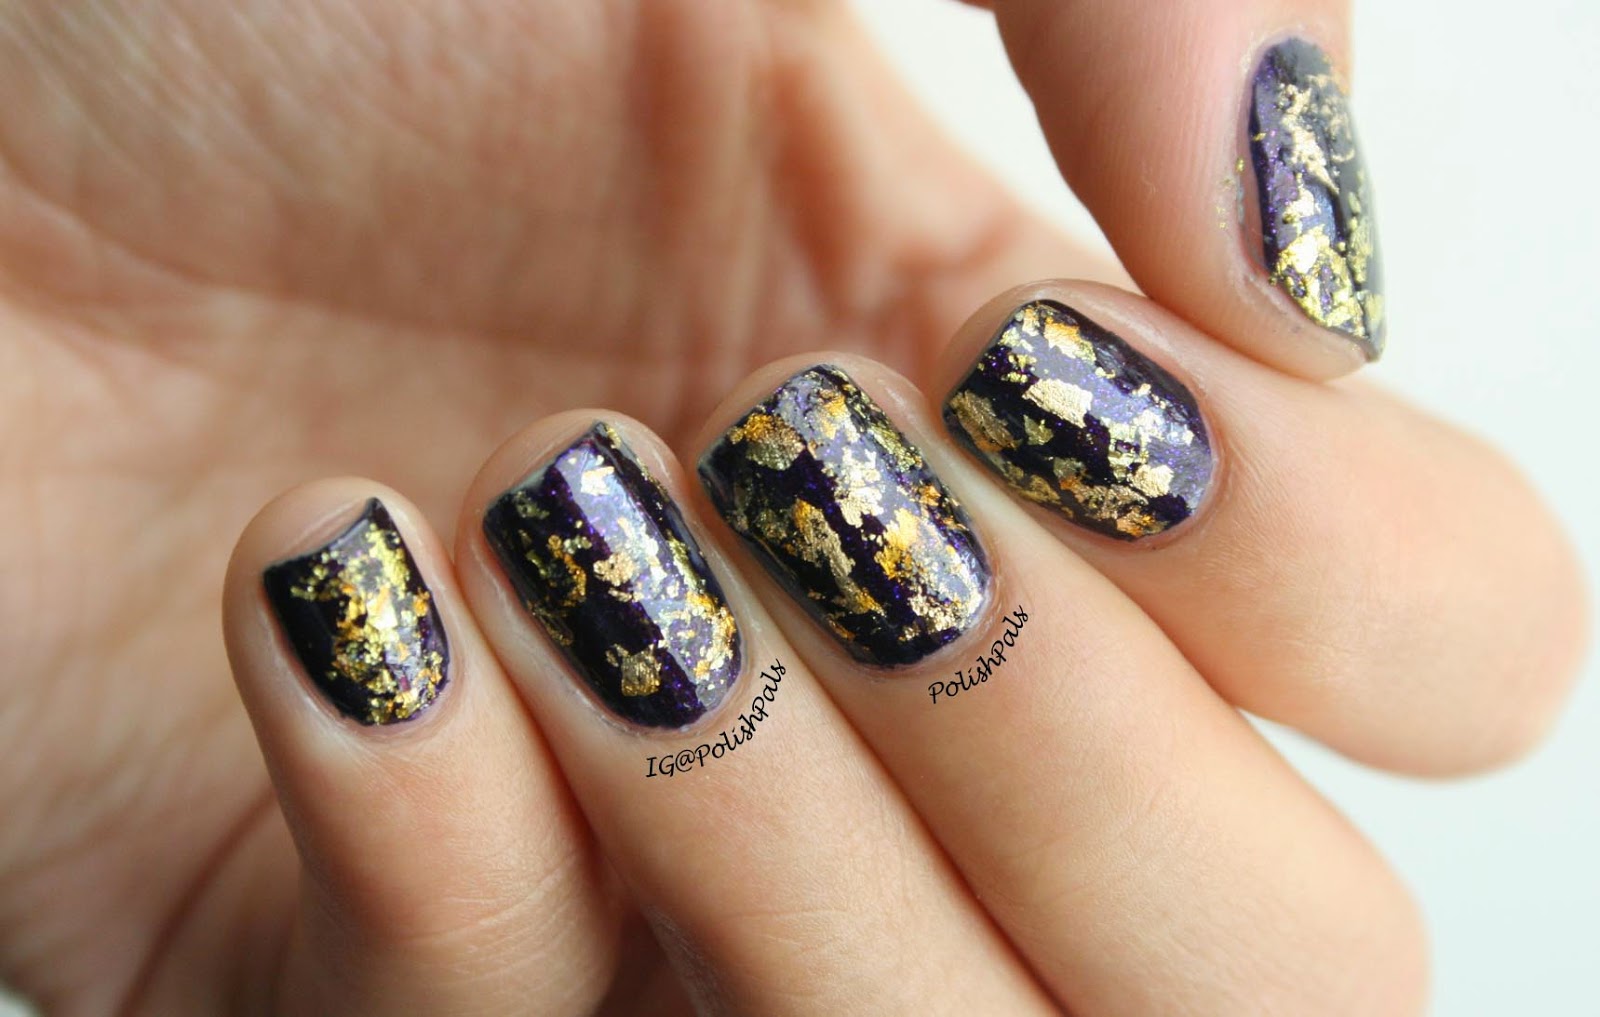 5. Dark Green Coffin Nails with Gold Foil Design - wide 2